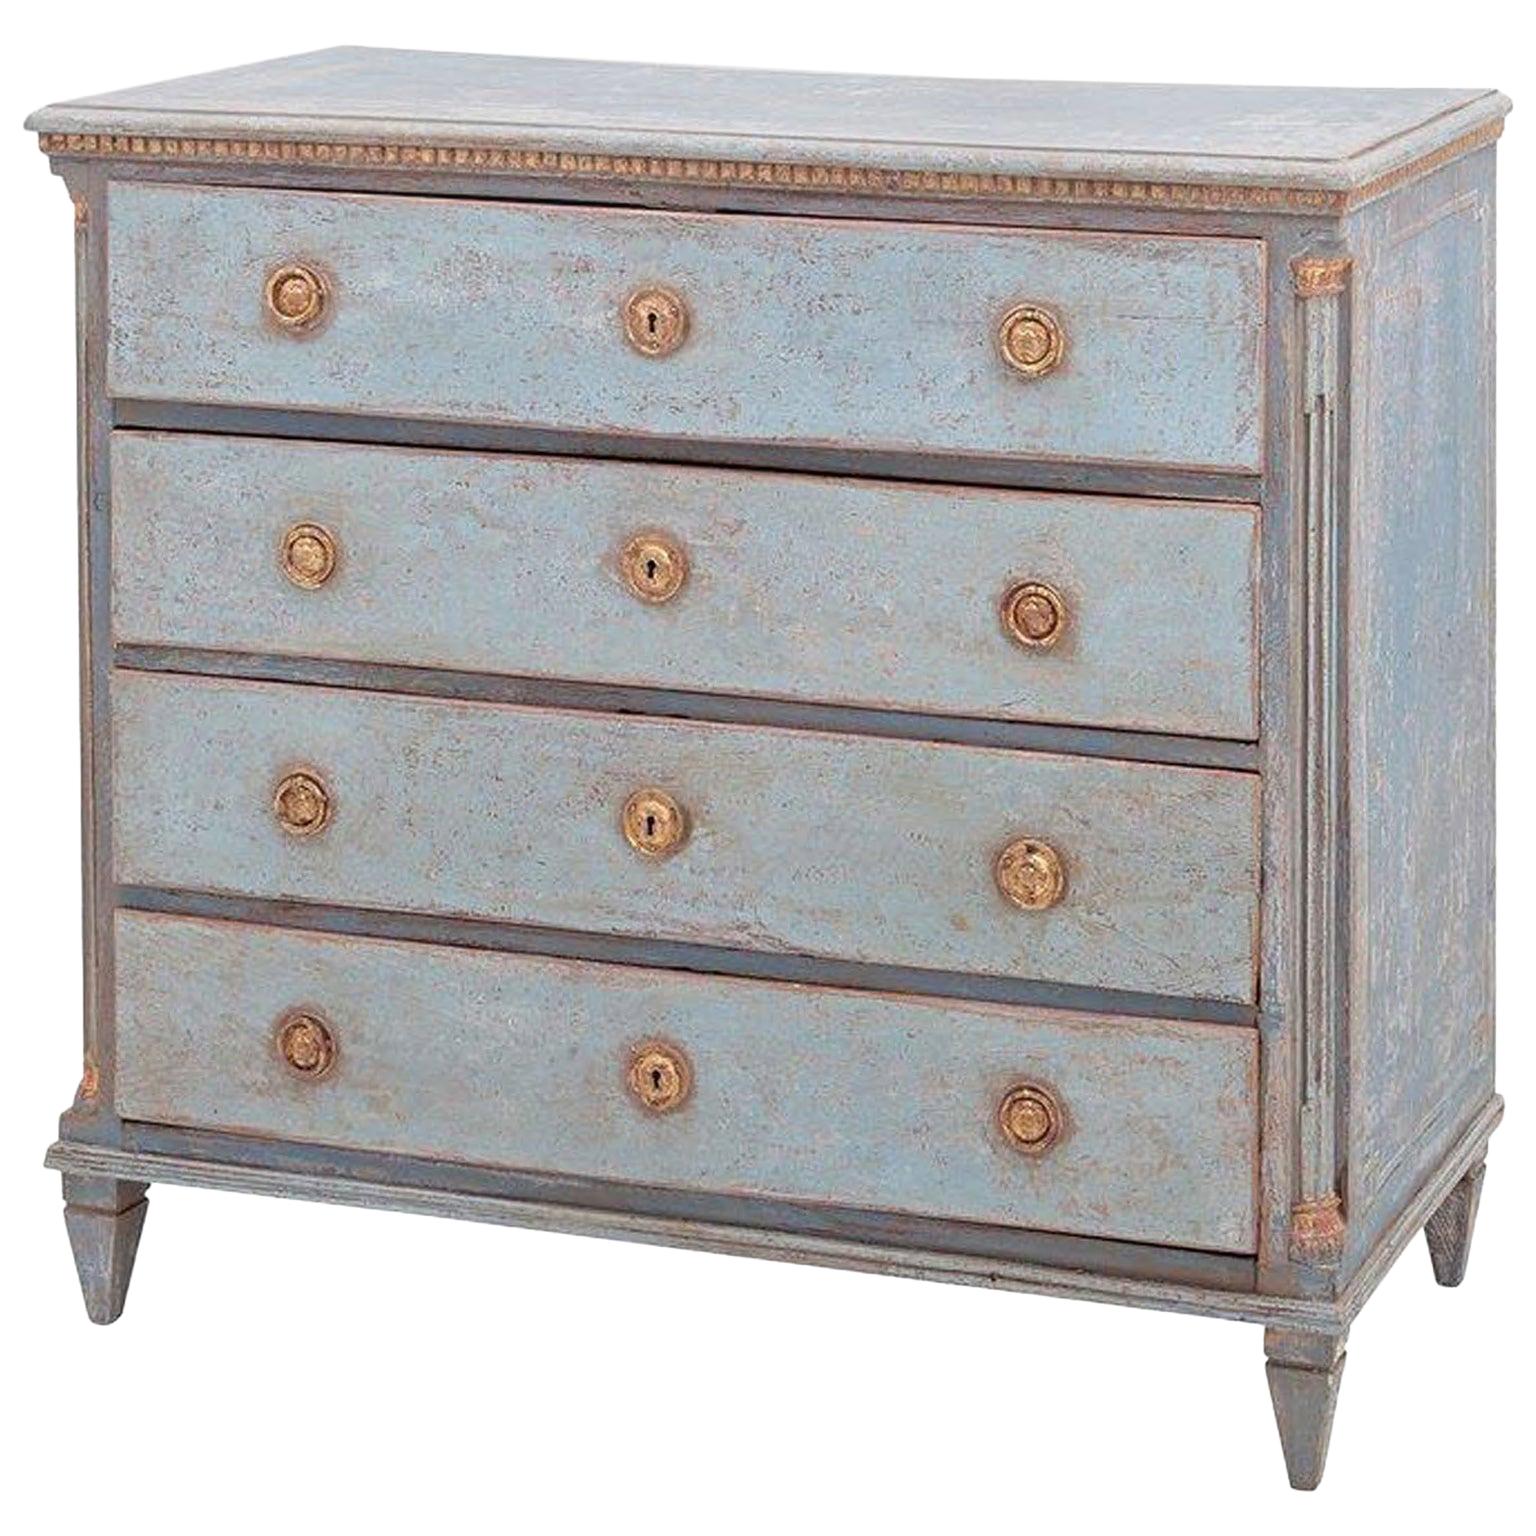 A light-blue, grey antique Swedish Gustavian commode made of hand carved painted Pinewood, in good condition. The rectangular Scandinavian chest is composed with four large drawers, standing on four short tapered feet. The cabinet is enhanced by